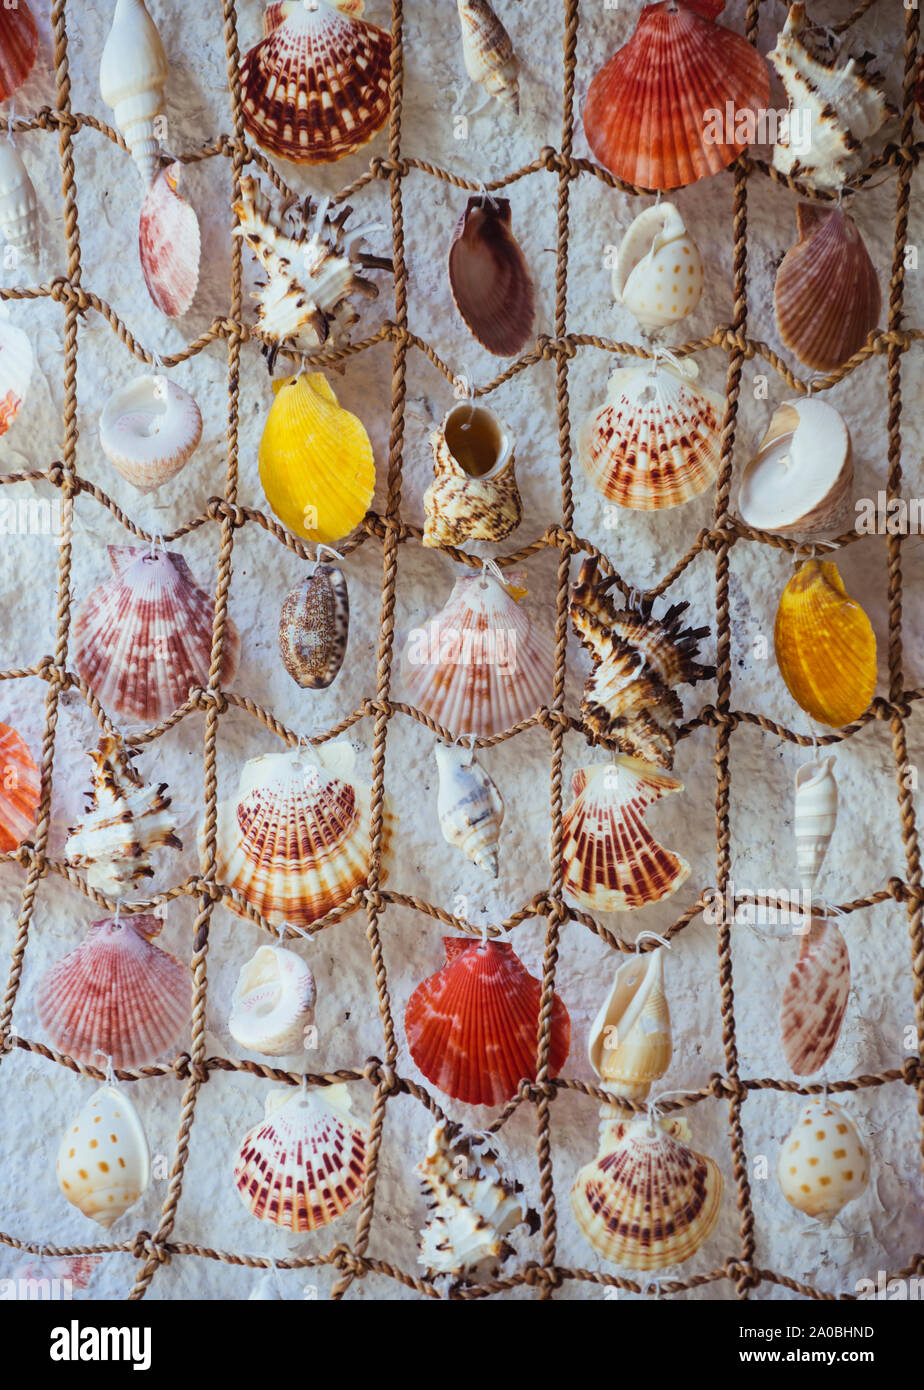 https://c8.alamy.com/comp/2A0BHND/fishing-fishing-net-with-seashells-network-with-beautiful-seashells-as-decor-decor-and-sea-concept-decoration-for-interior-decoration-of-walls-n-2A0BHND.jpg